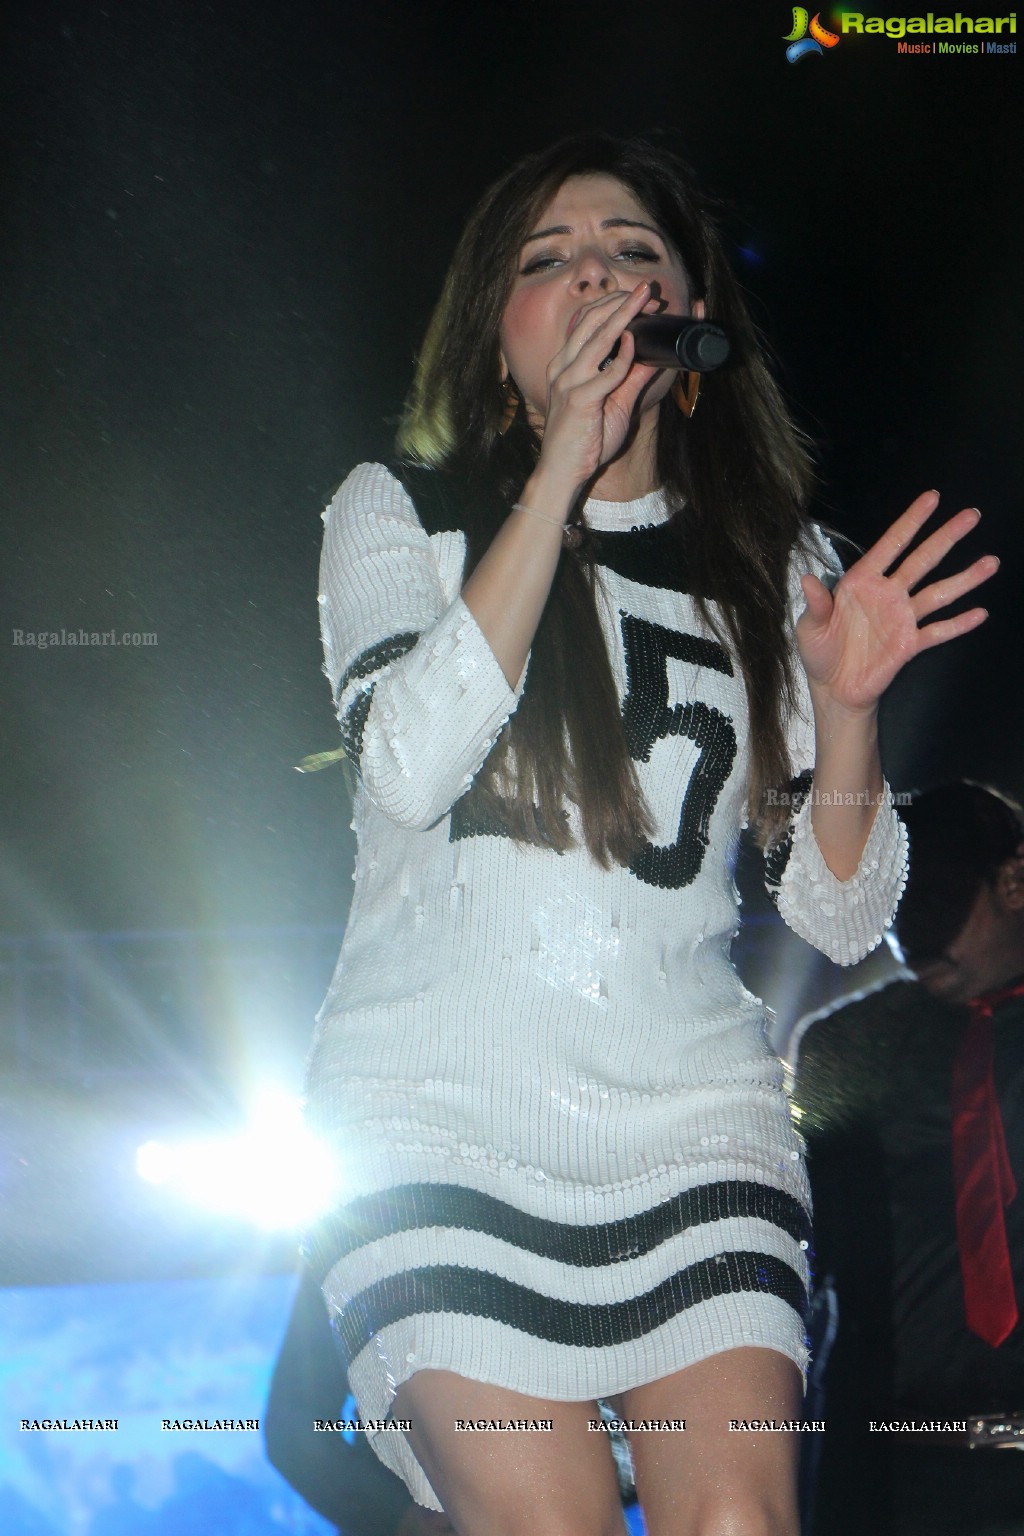 Kanika Kapoor Live in Concert by TKR Group of Institutions